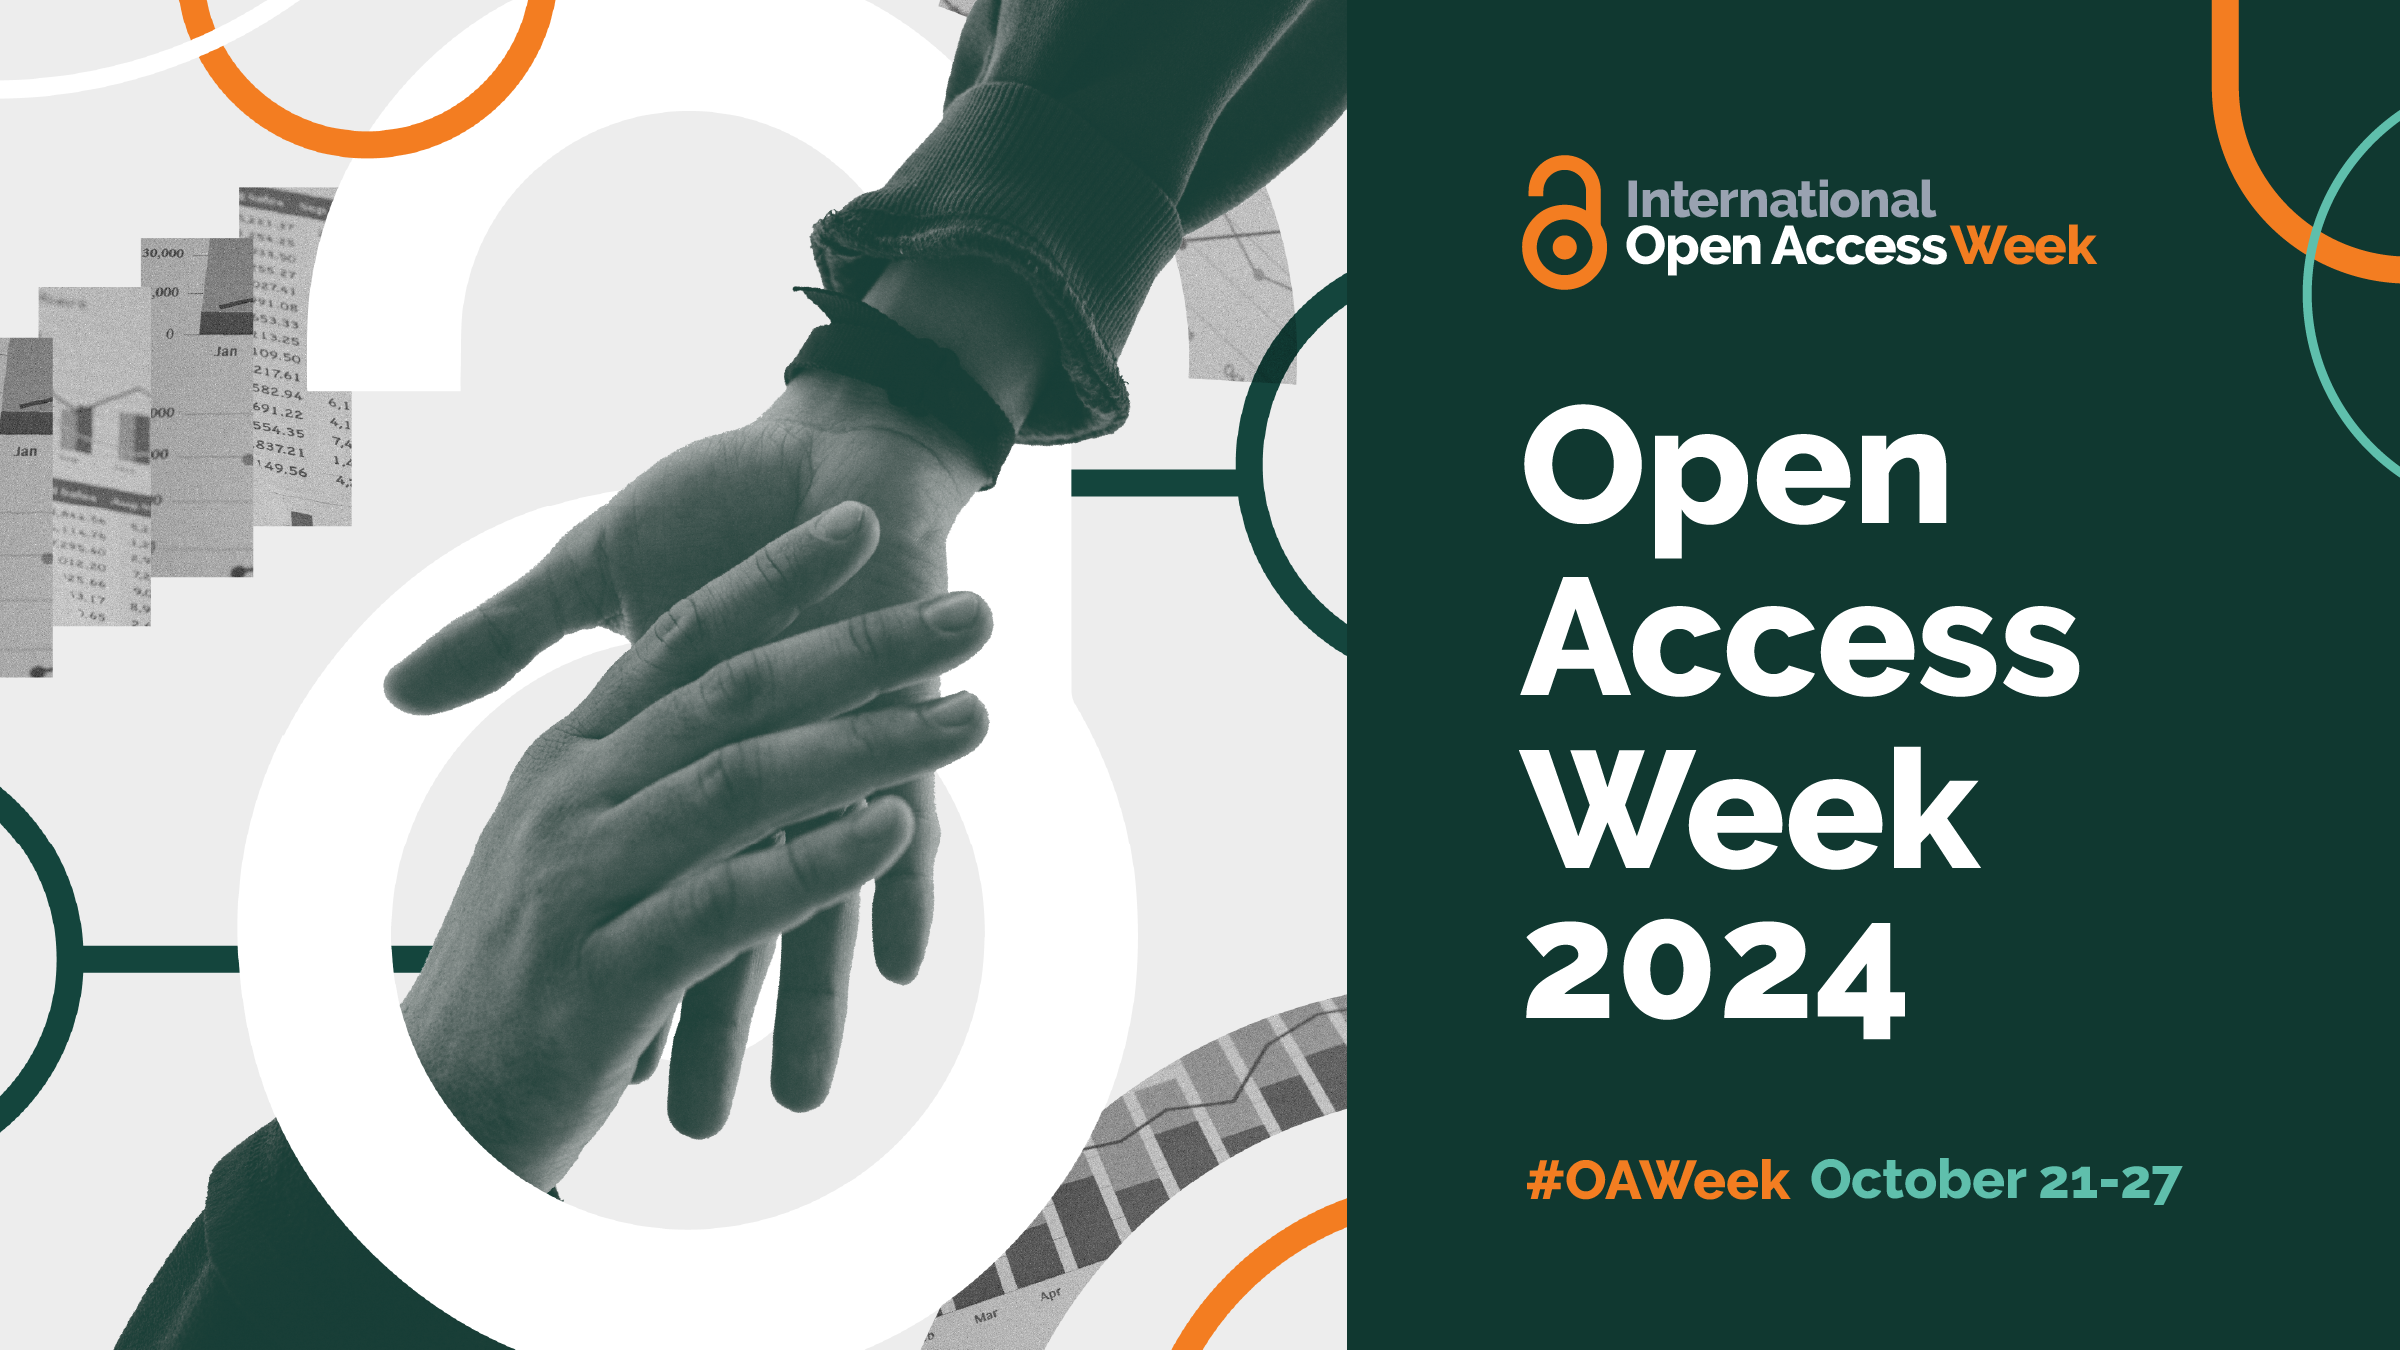 A picture that shows two hands shaking through an open lock with the words International Open Access Week 2024 and the dates October 21-27